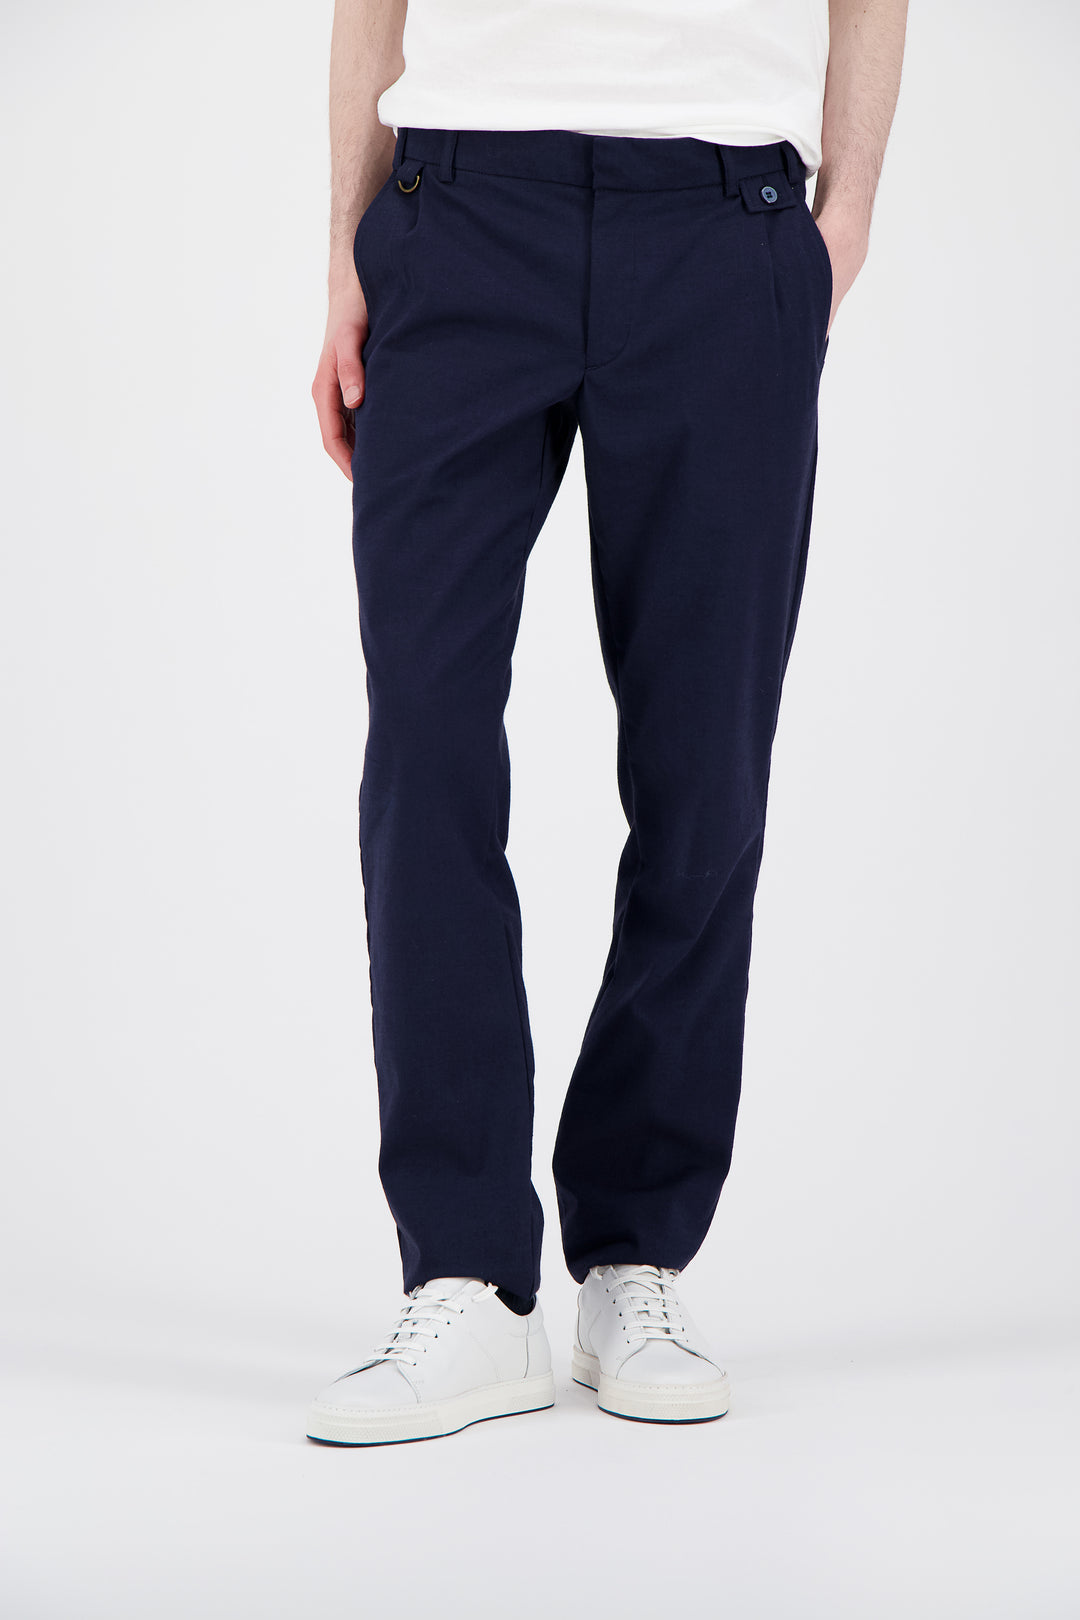 Blue city pant with darts